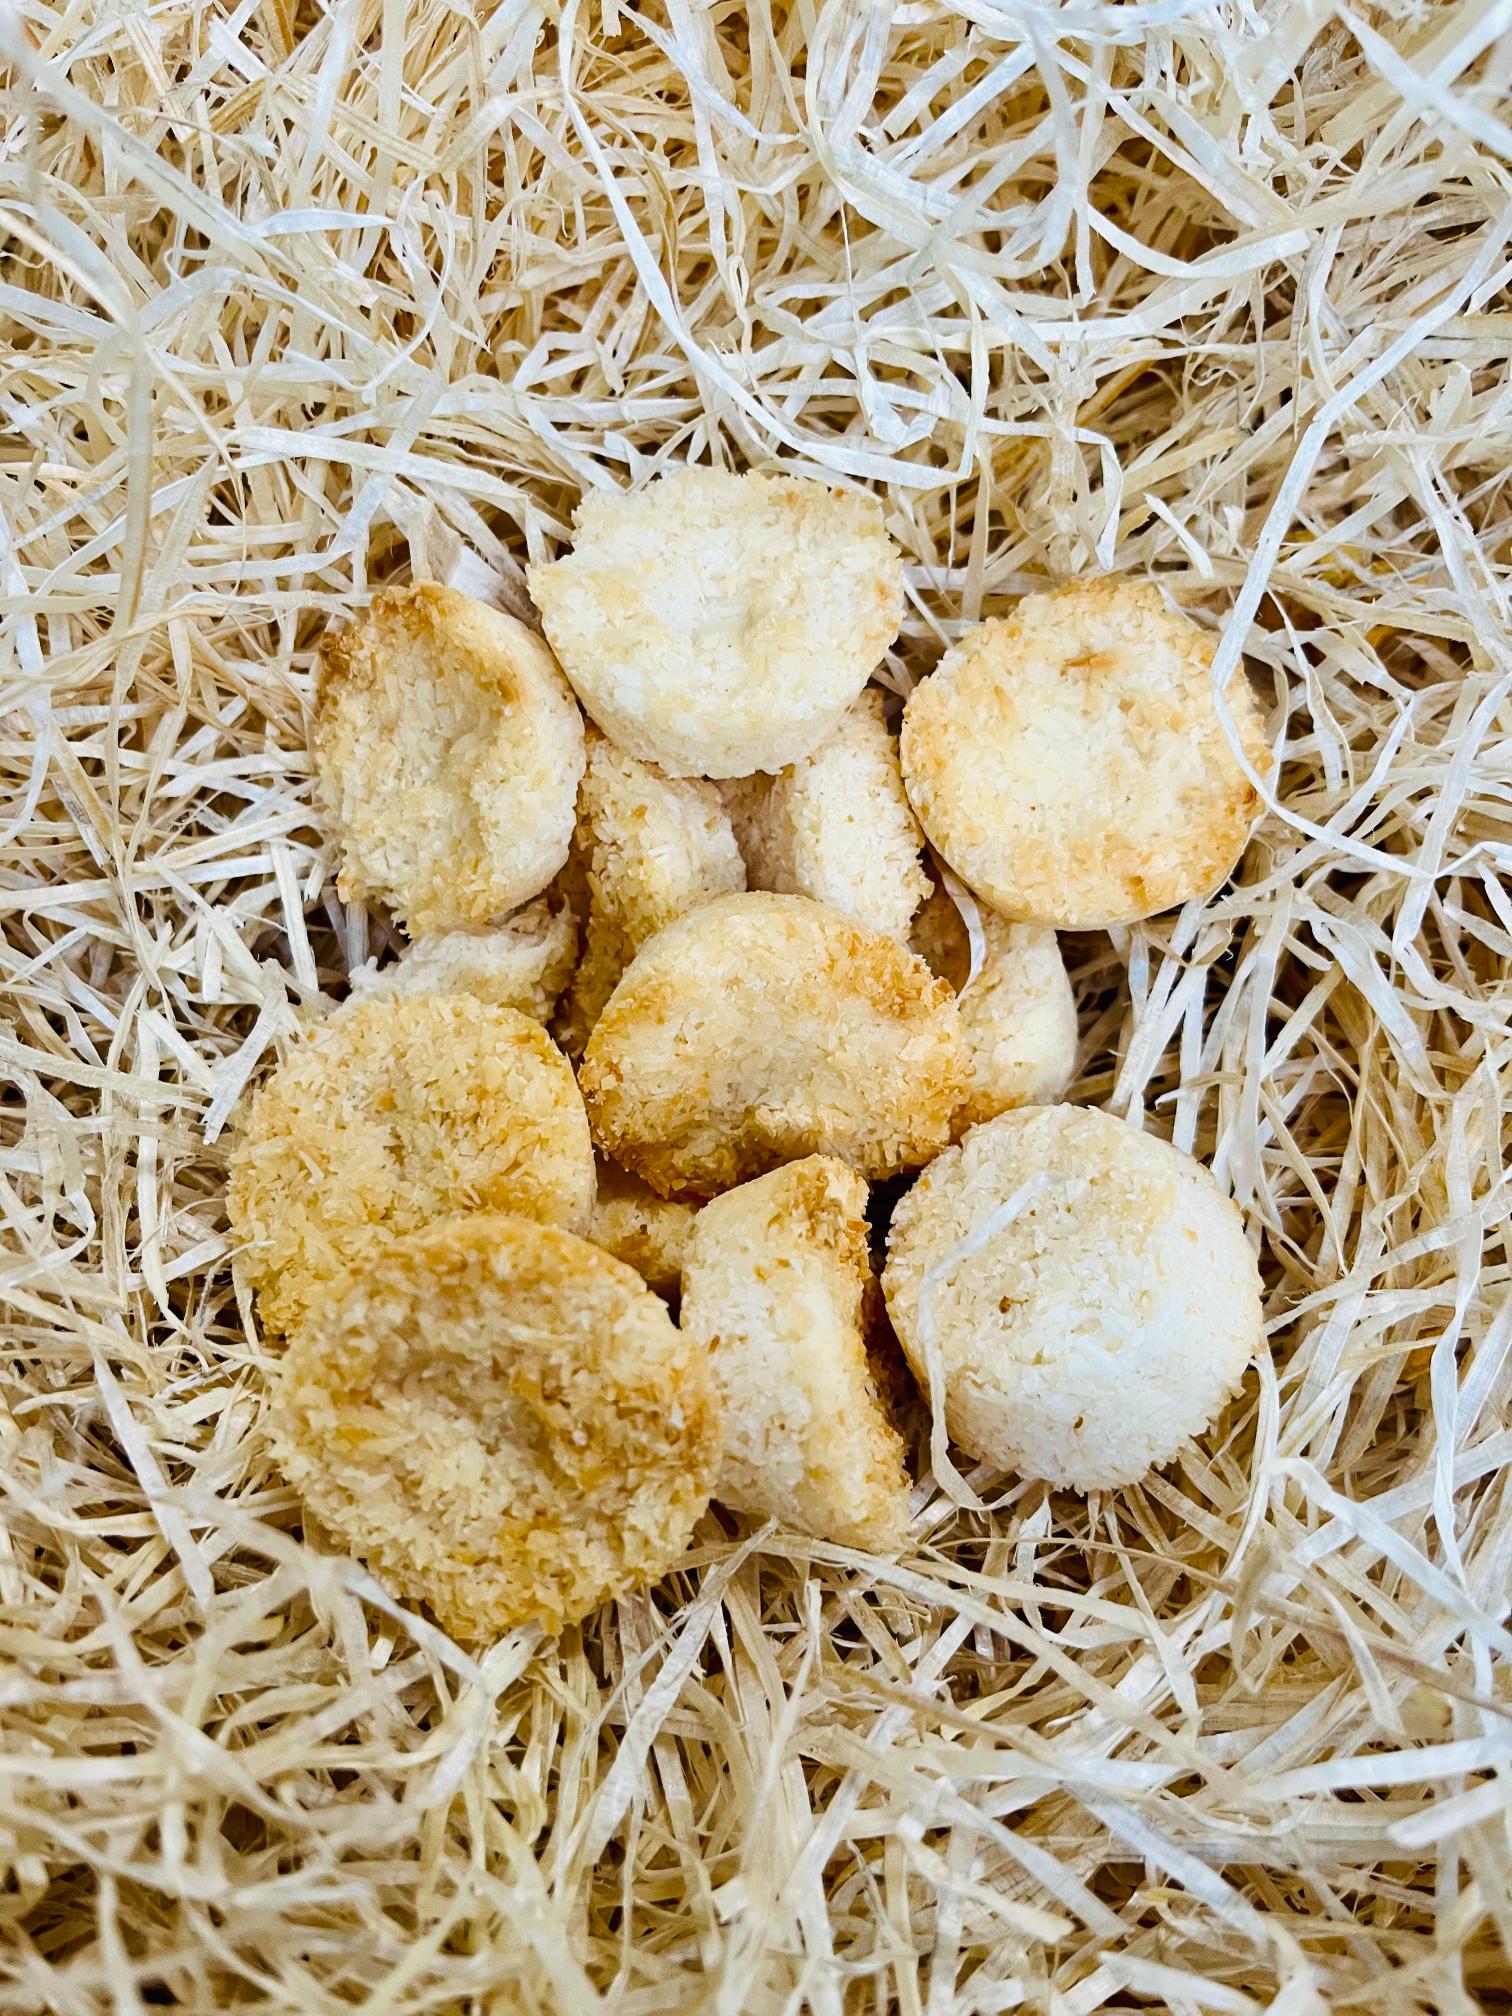 The Original Coconut Macaroons For Dogs—Grain Free Natural Dog Treats